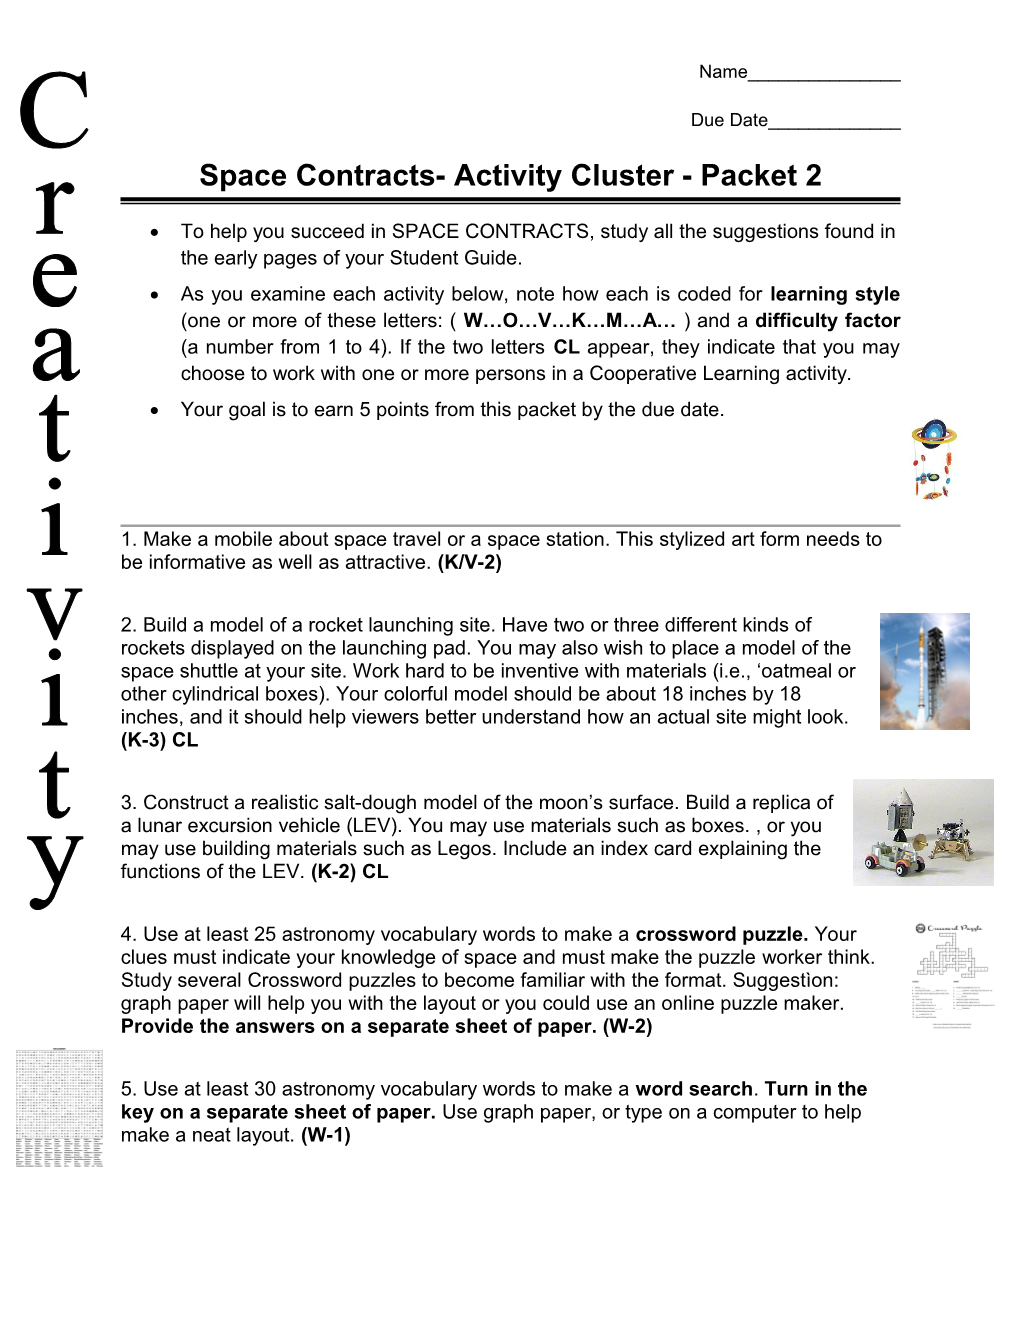 Space Contracts- Activity Cluster - Packet 2